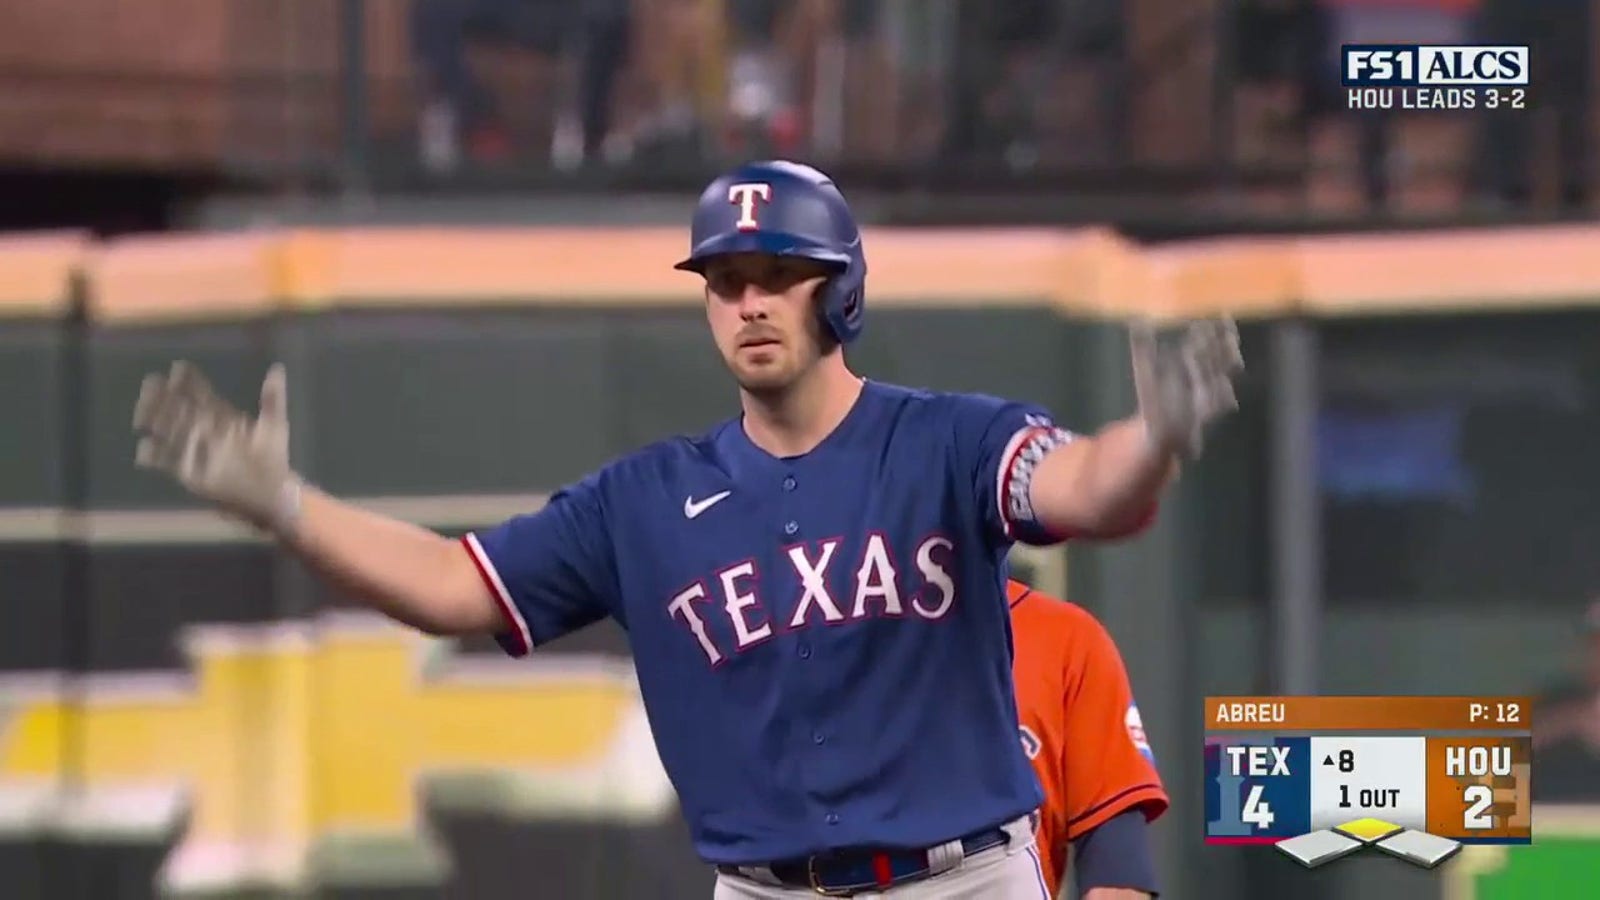 Mitch Garver hits an RBI double to extend Rangers' lead over Astros